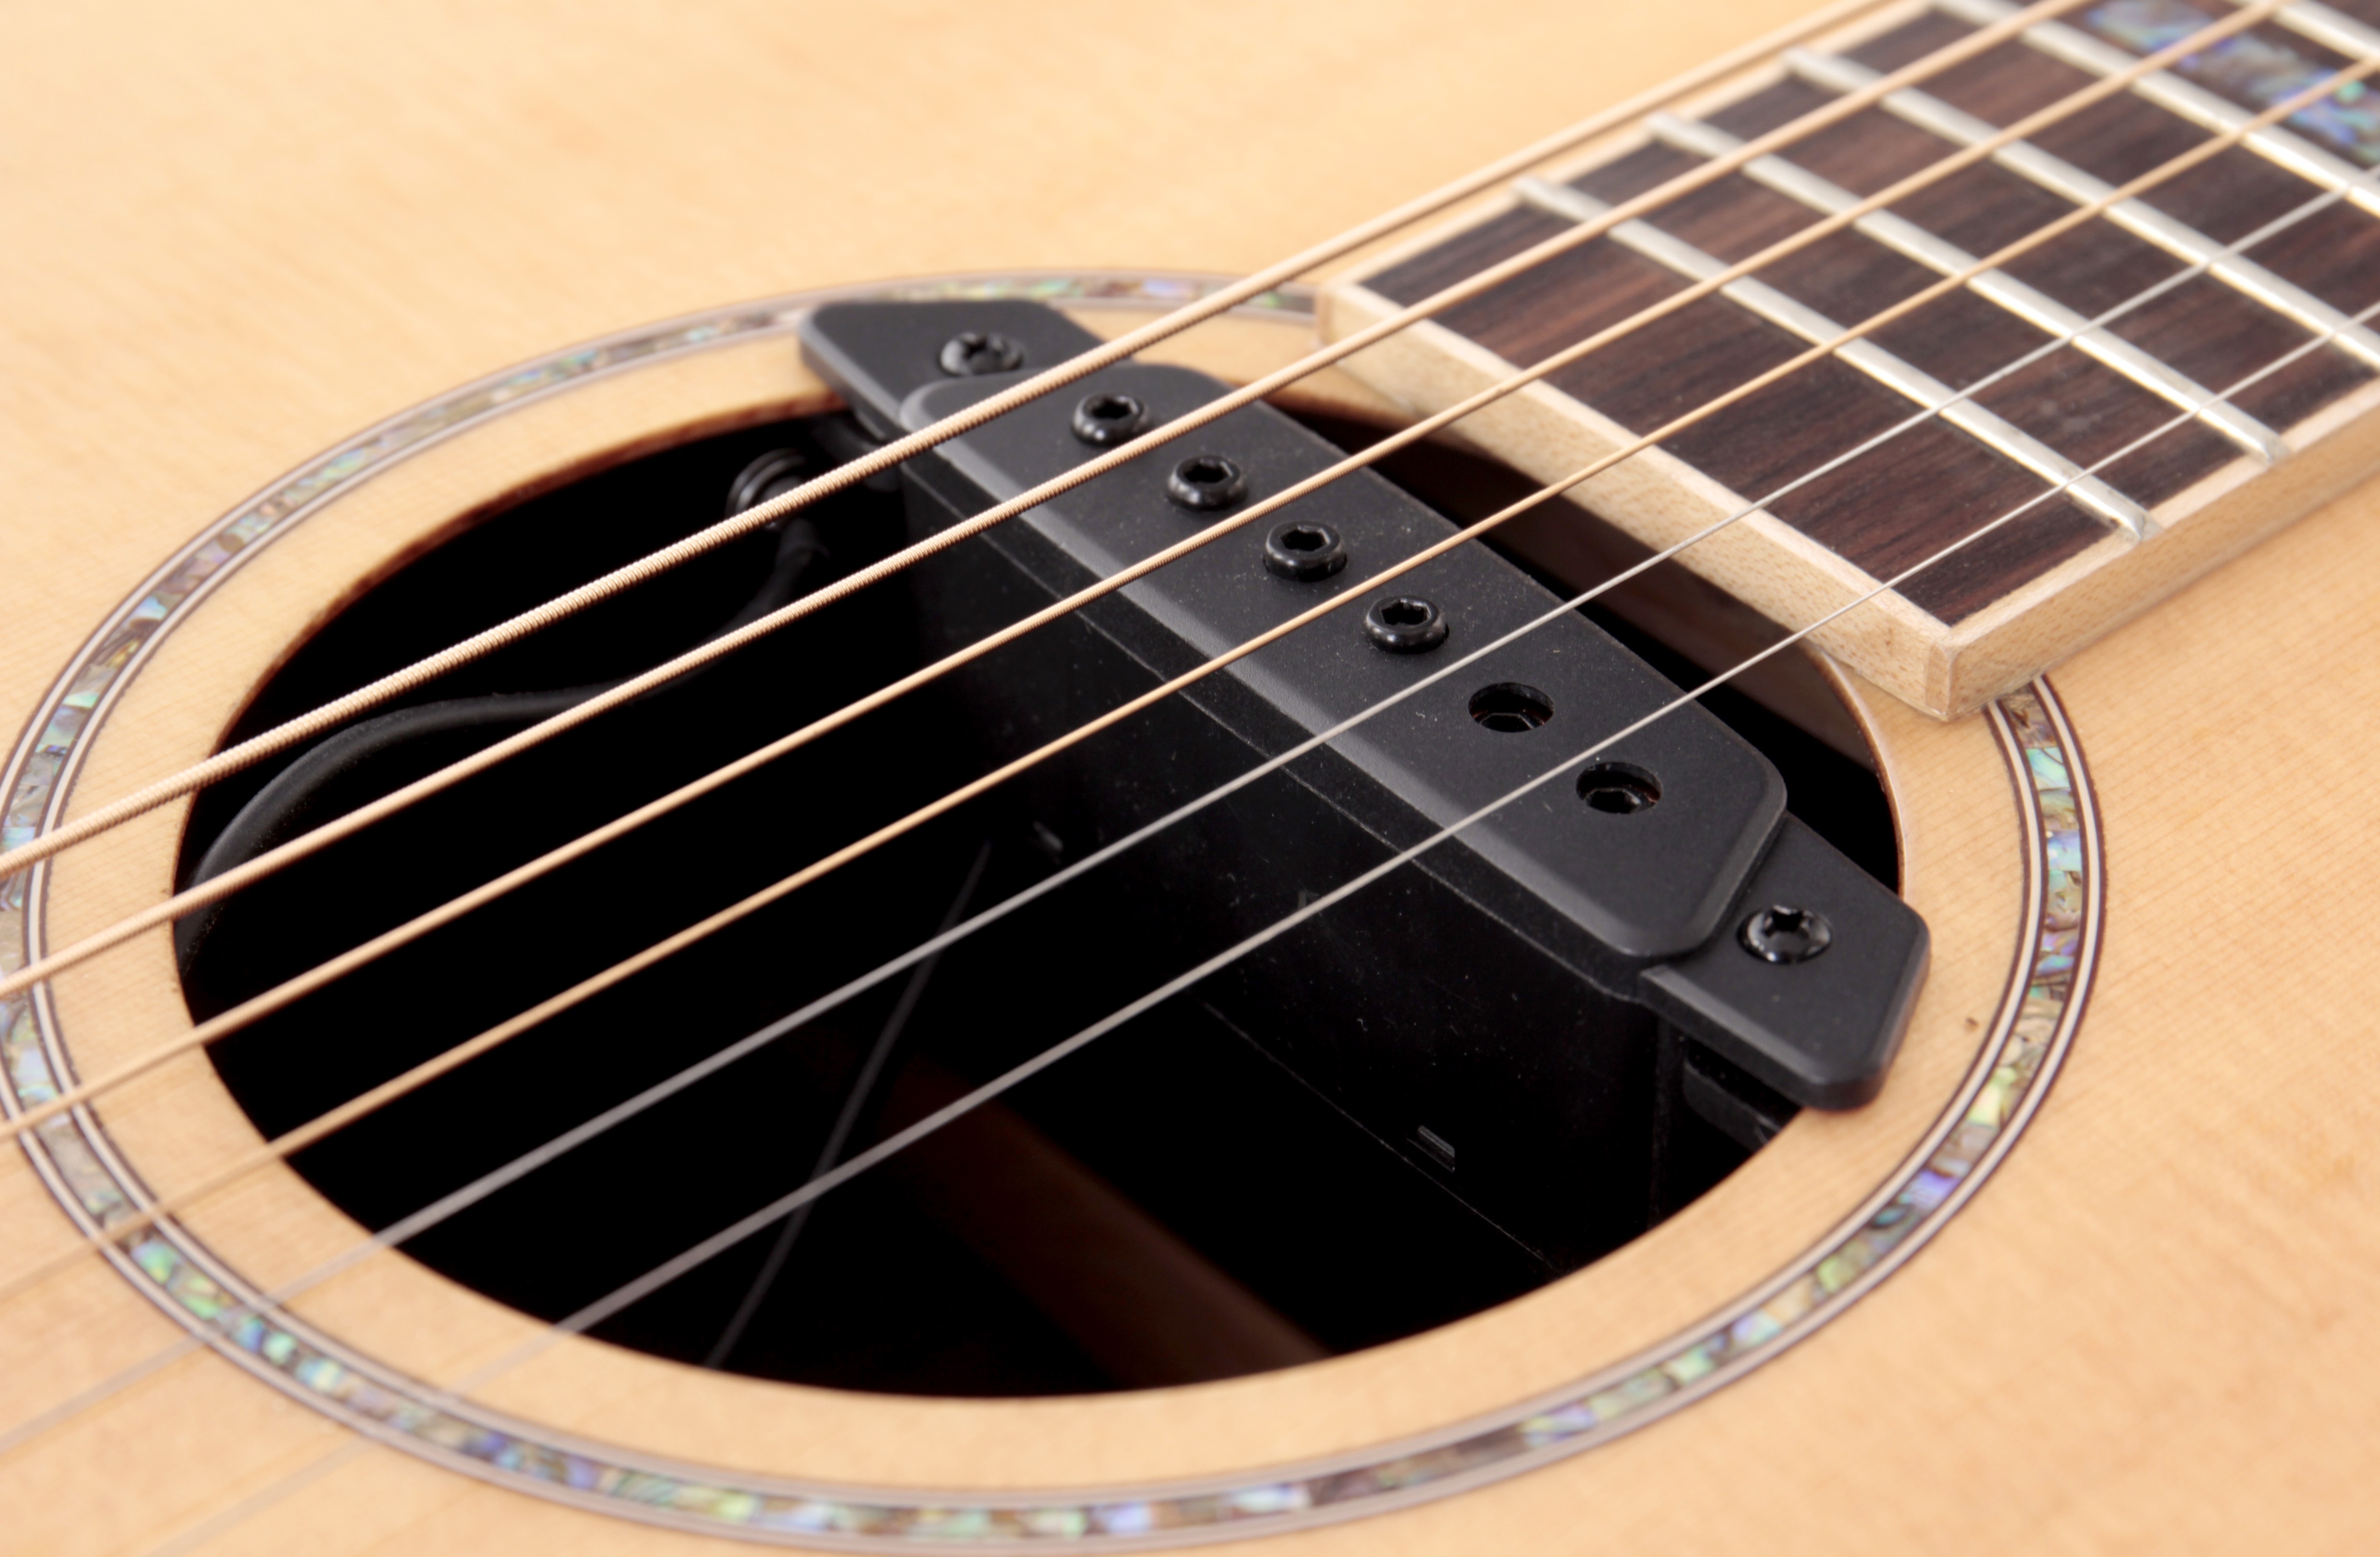 Kmise Acoustic Pickup Meegoo Acoustic Piezo Vs soundhole Pickups – What’s the Difference andertons Blog Of Kmise Acoustic Pickup Meegoo